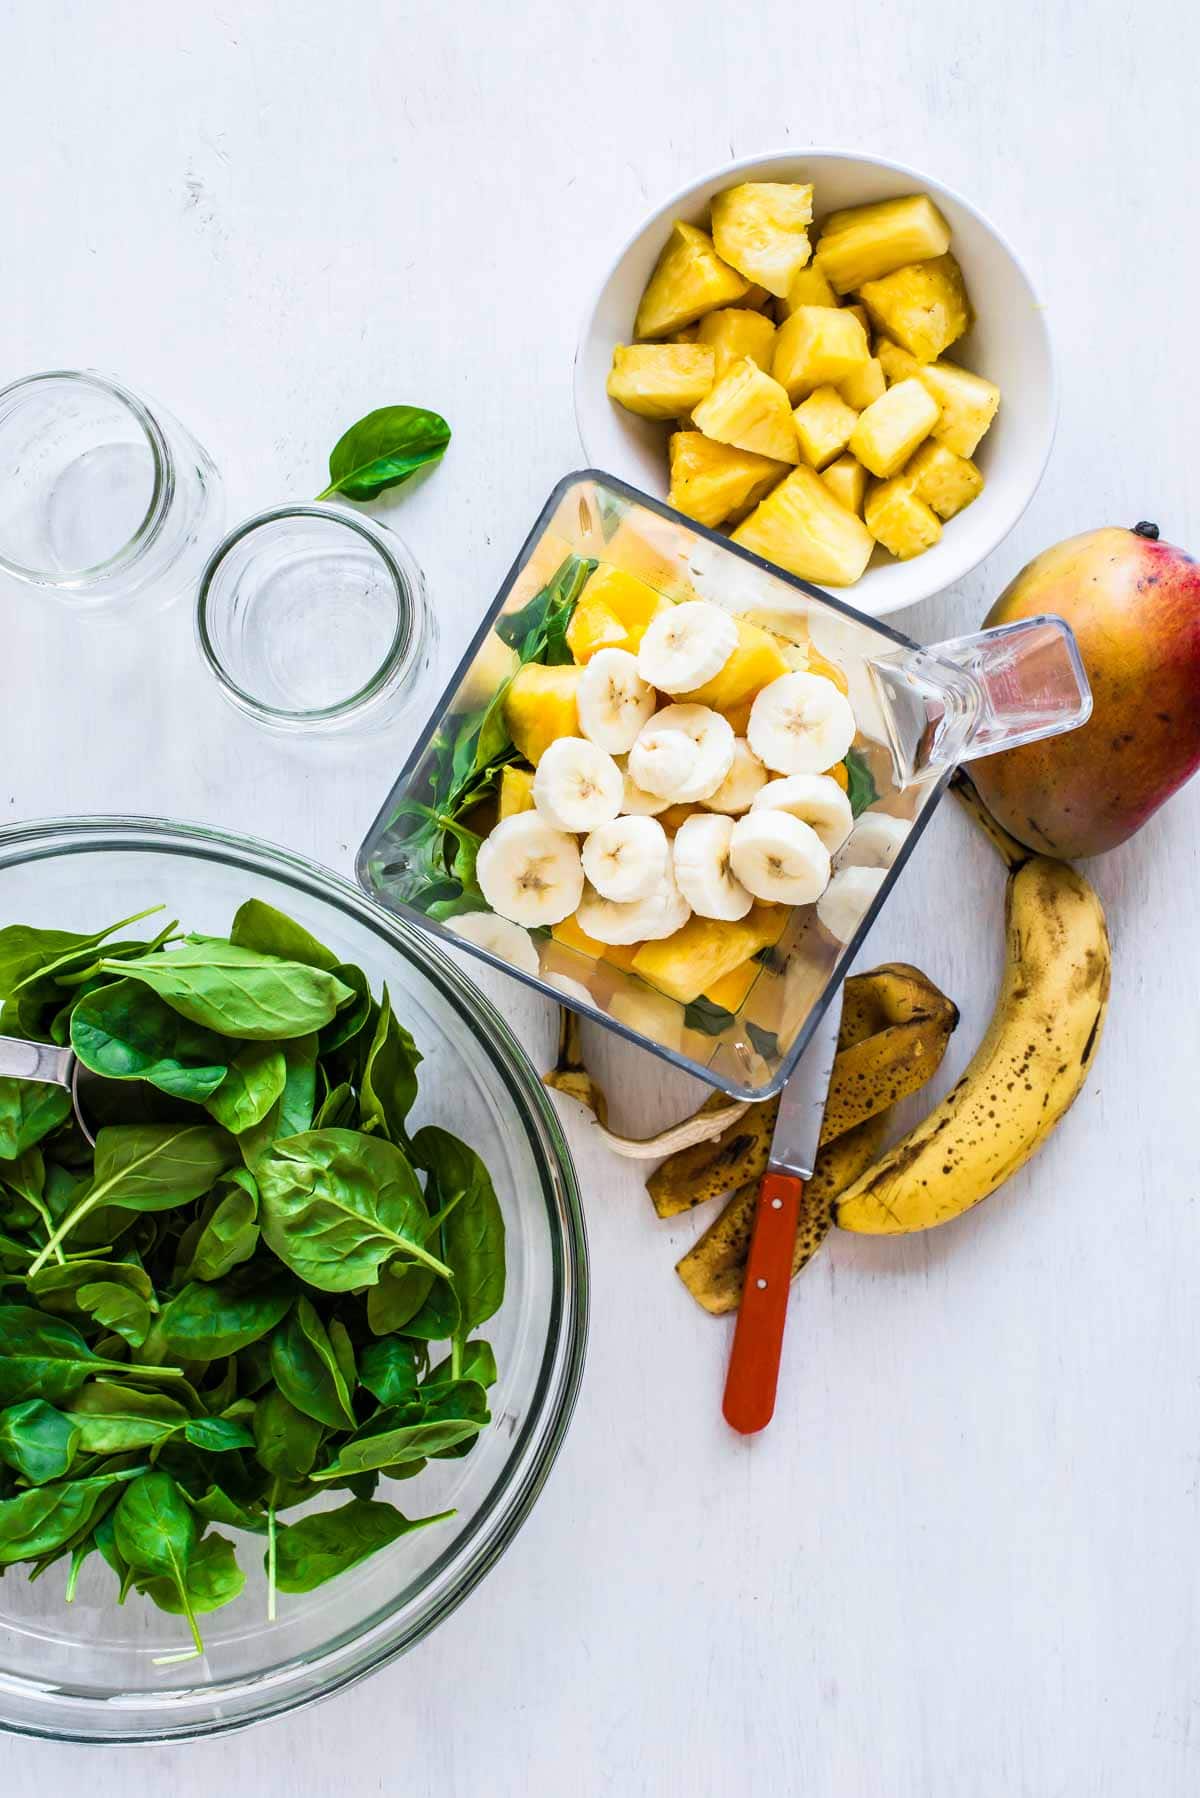 Freshly cut bananas and pineapple to make a green smoothie recipe.